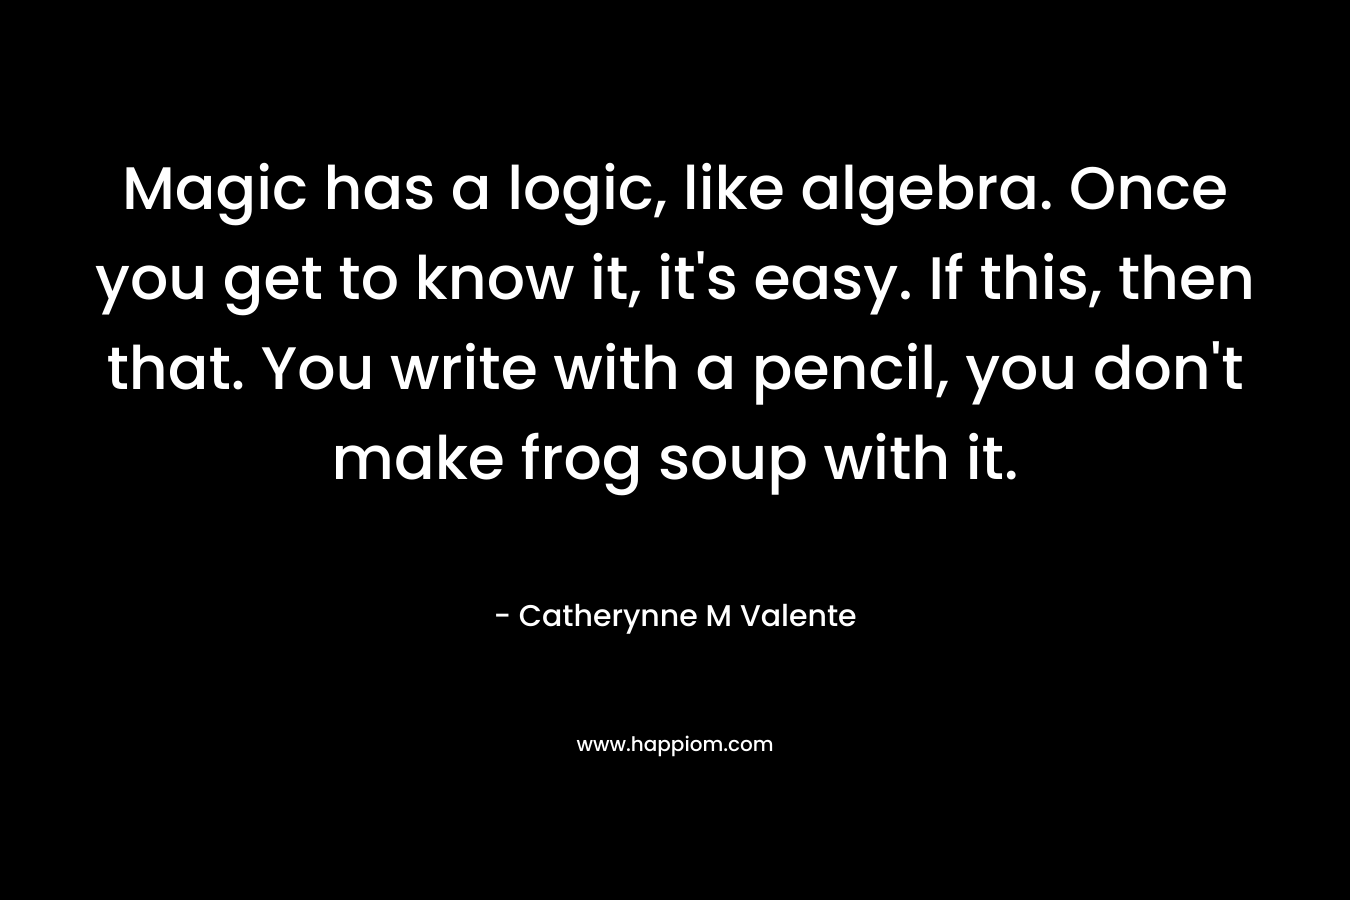 Magic has a logic, like algebra. Once you get to know it, it’s easy. If this, then that. You write with a pencil, you don’t make frog soup with it. – Catherynne M Valente